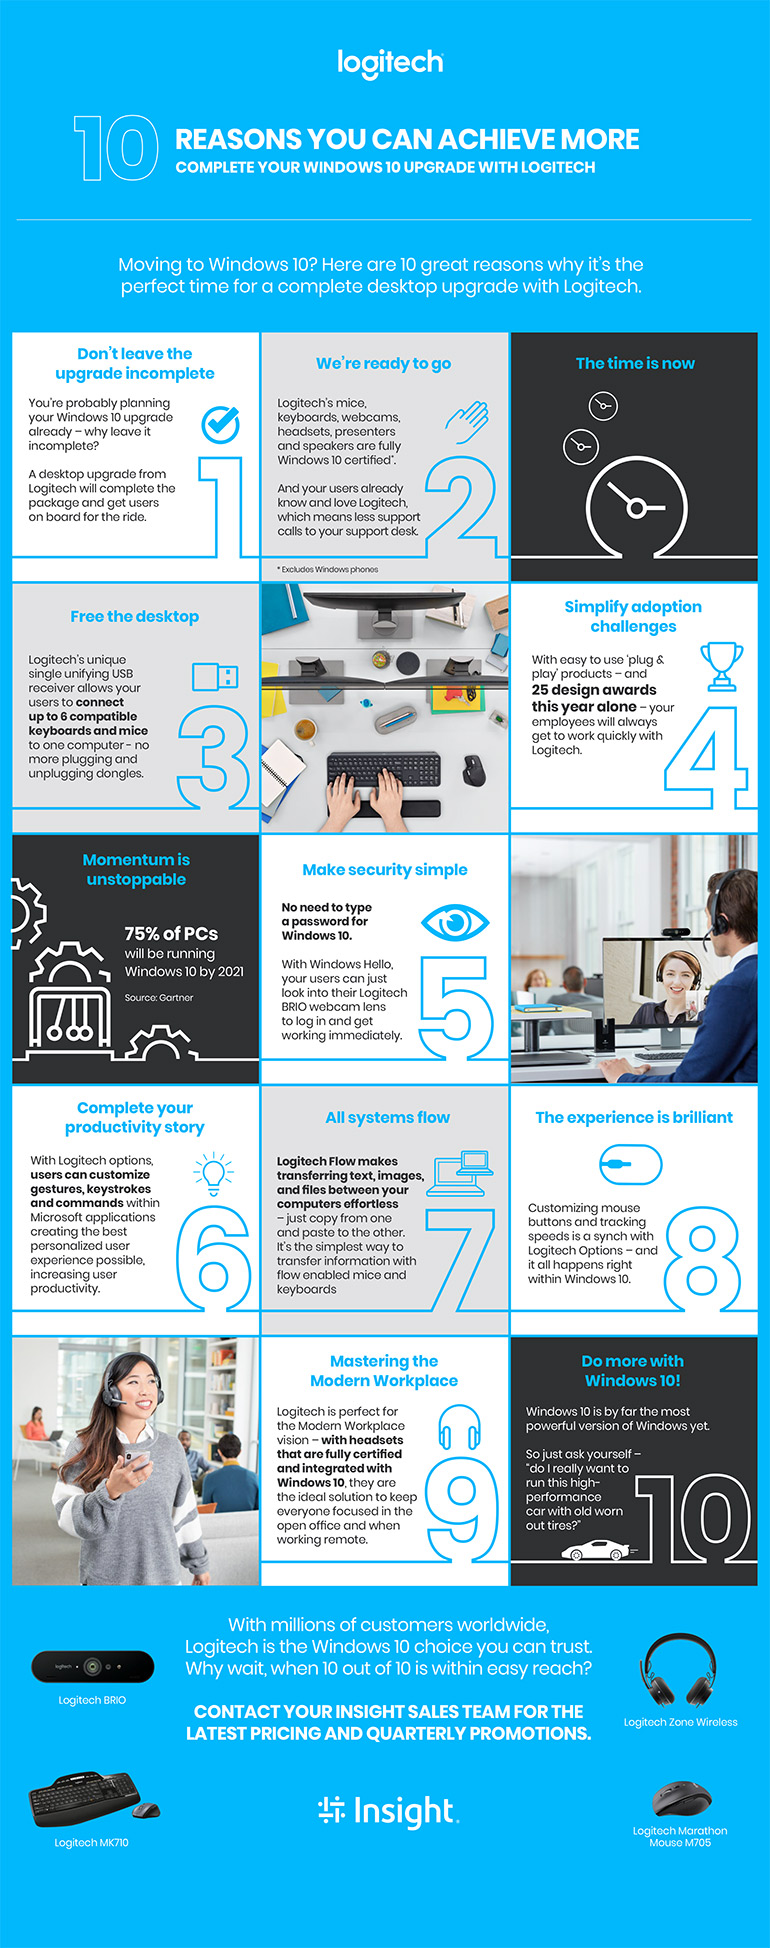 10 Reasons Why Logitech Will Complete Your Windows 10 Upgrade infographic as transcribed below